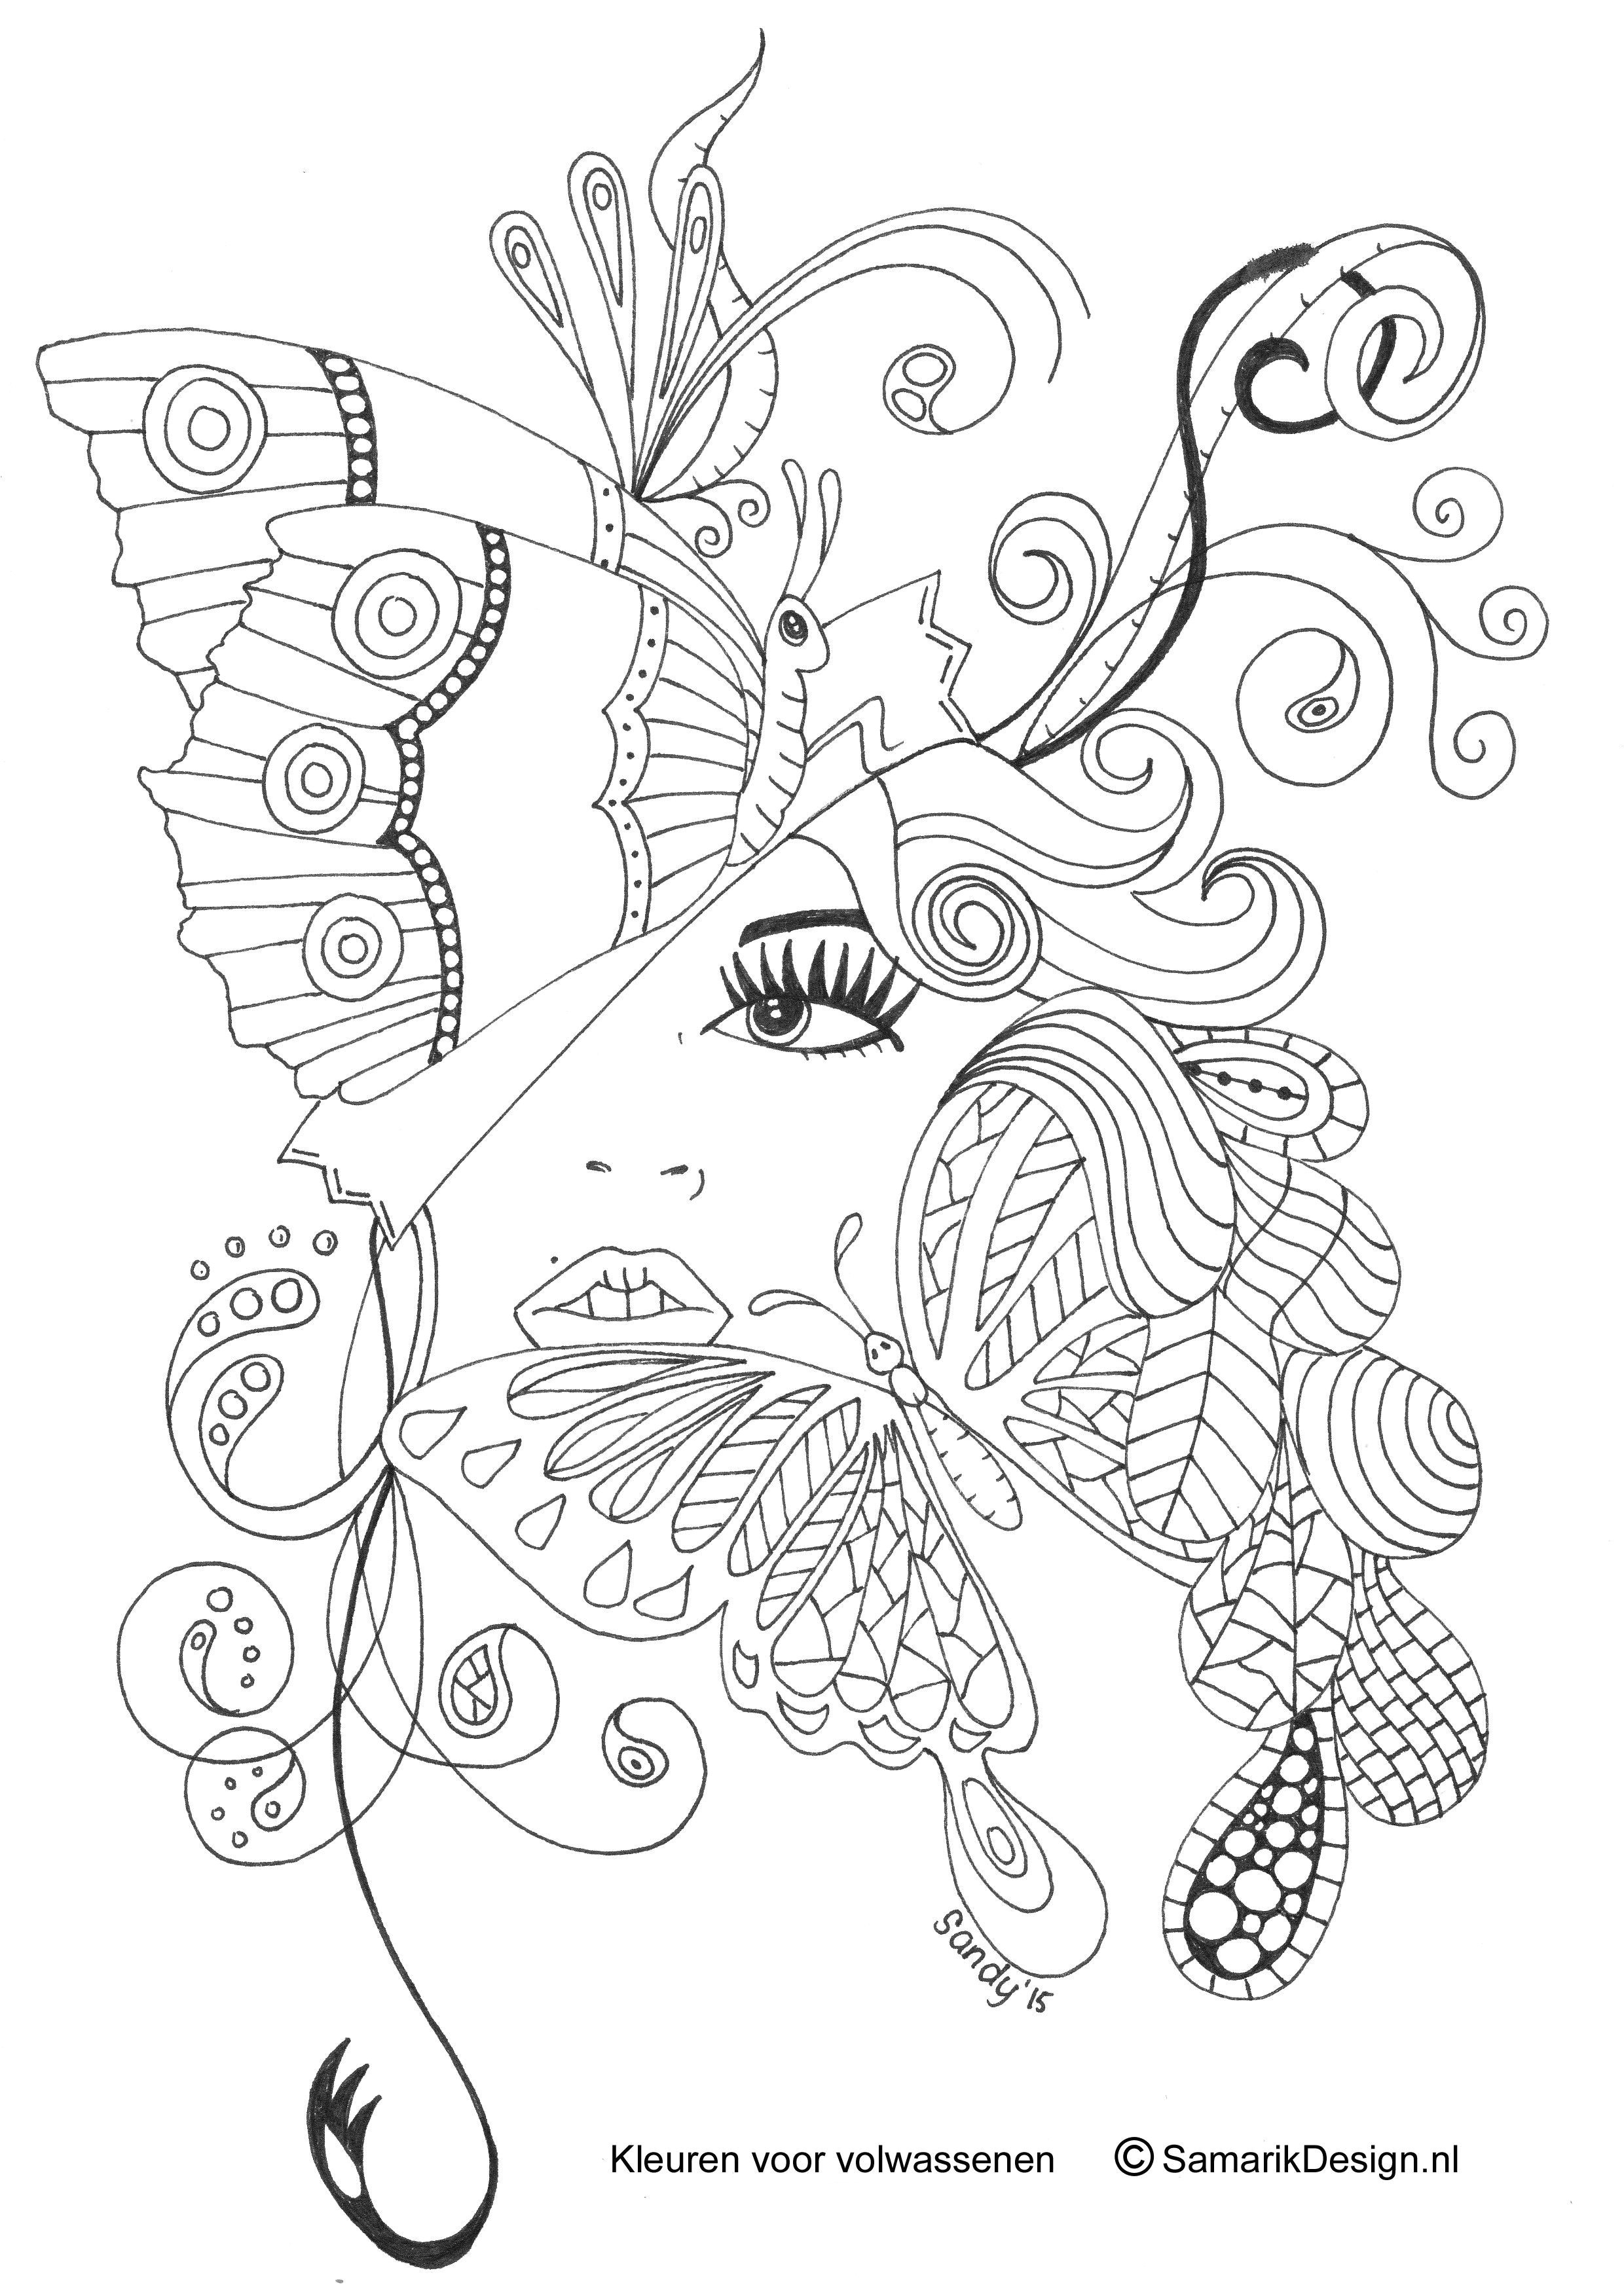 Butterfly Papillon Mariposas Vlinders Wings Graceful Amazing Coloring pages colouring adult detailed advanced printable Kleuren voor volwassenen coloriage